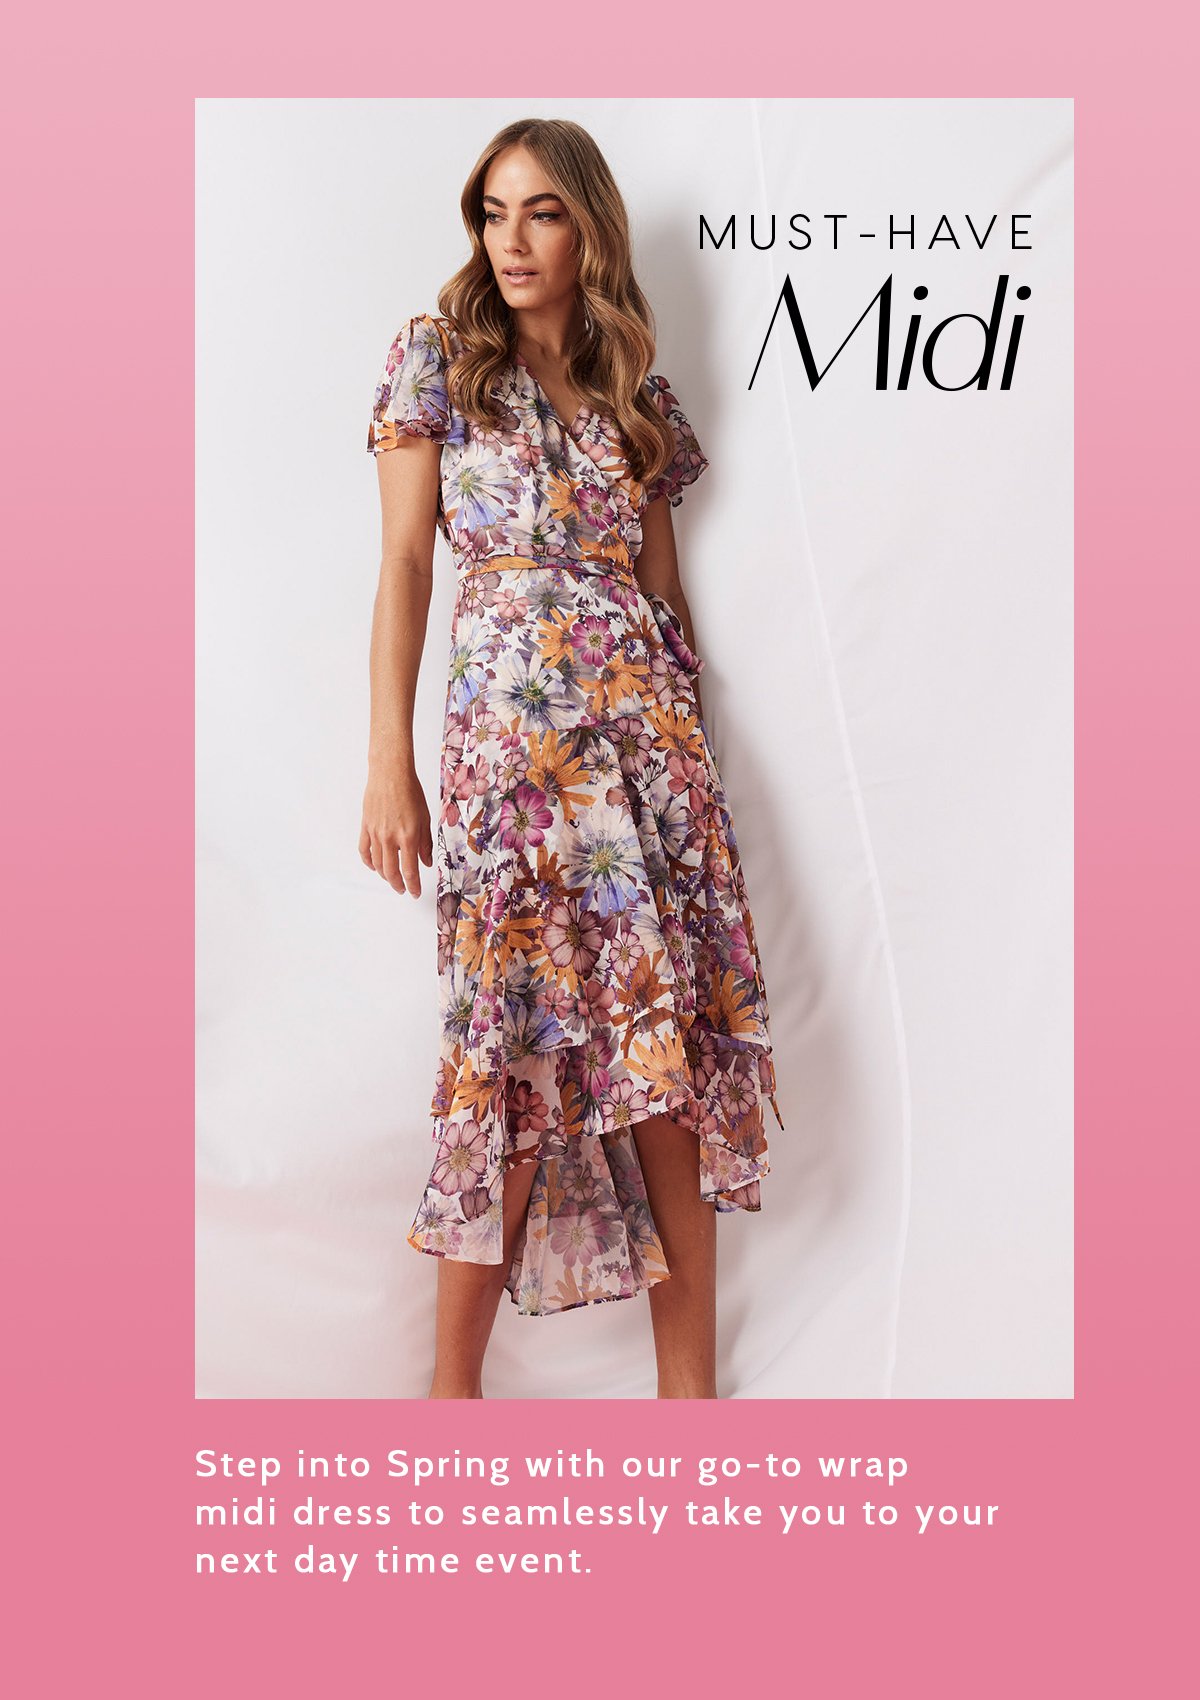 Step into Spring with our go-to wrap midi dress to seamlessly take you to your next day time event.